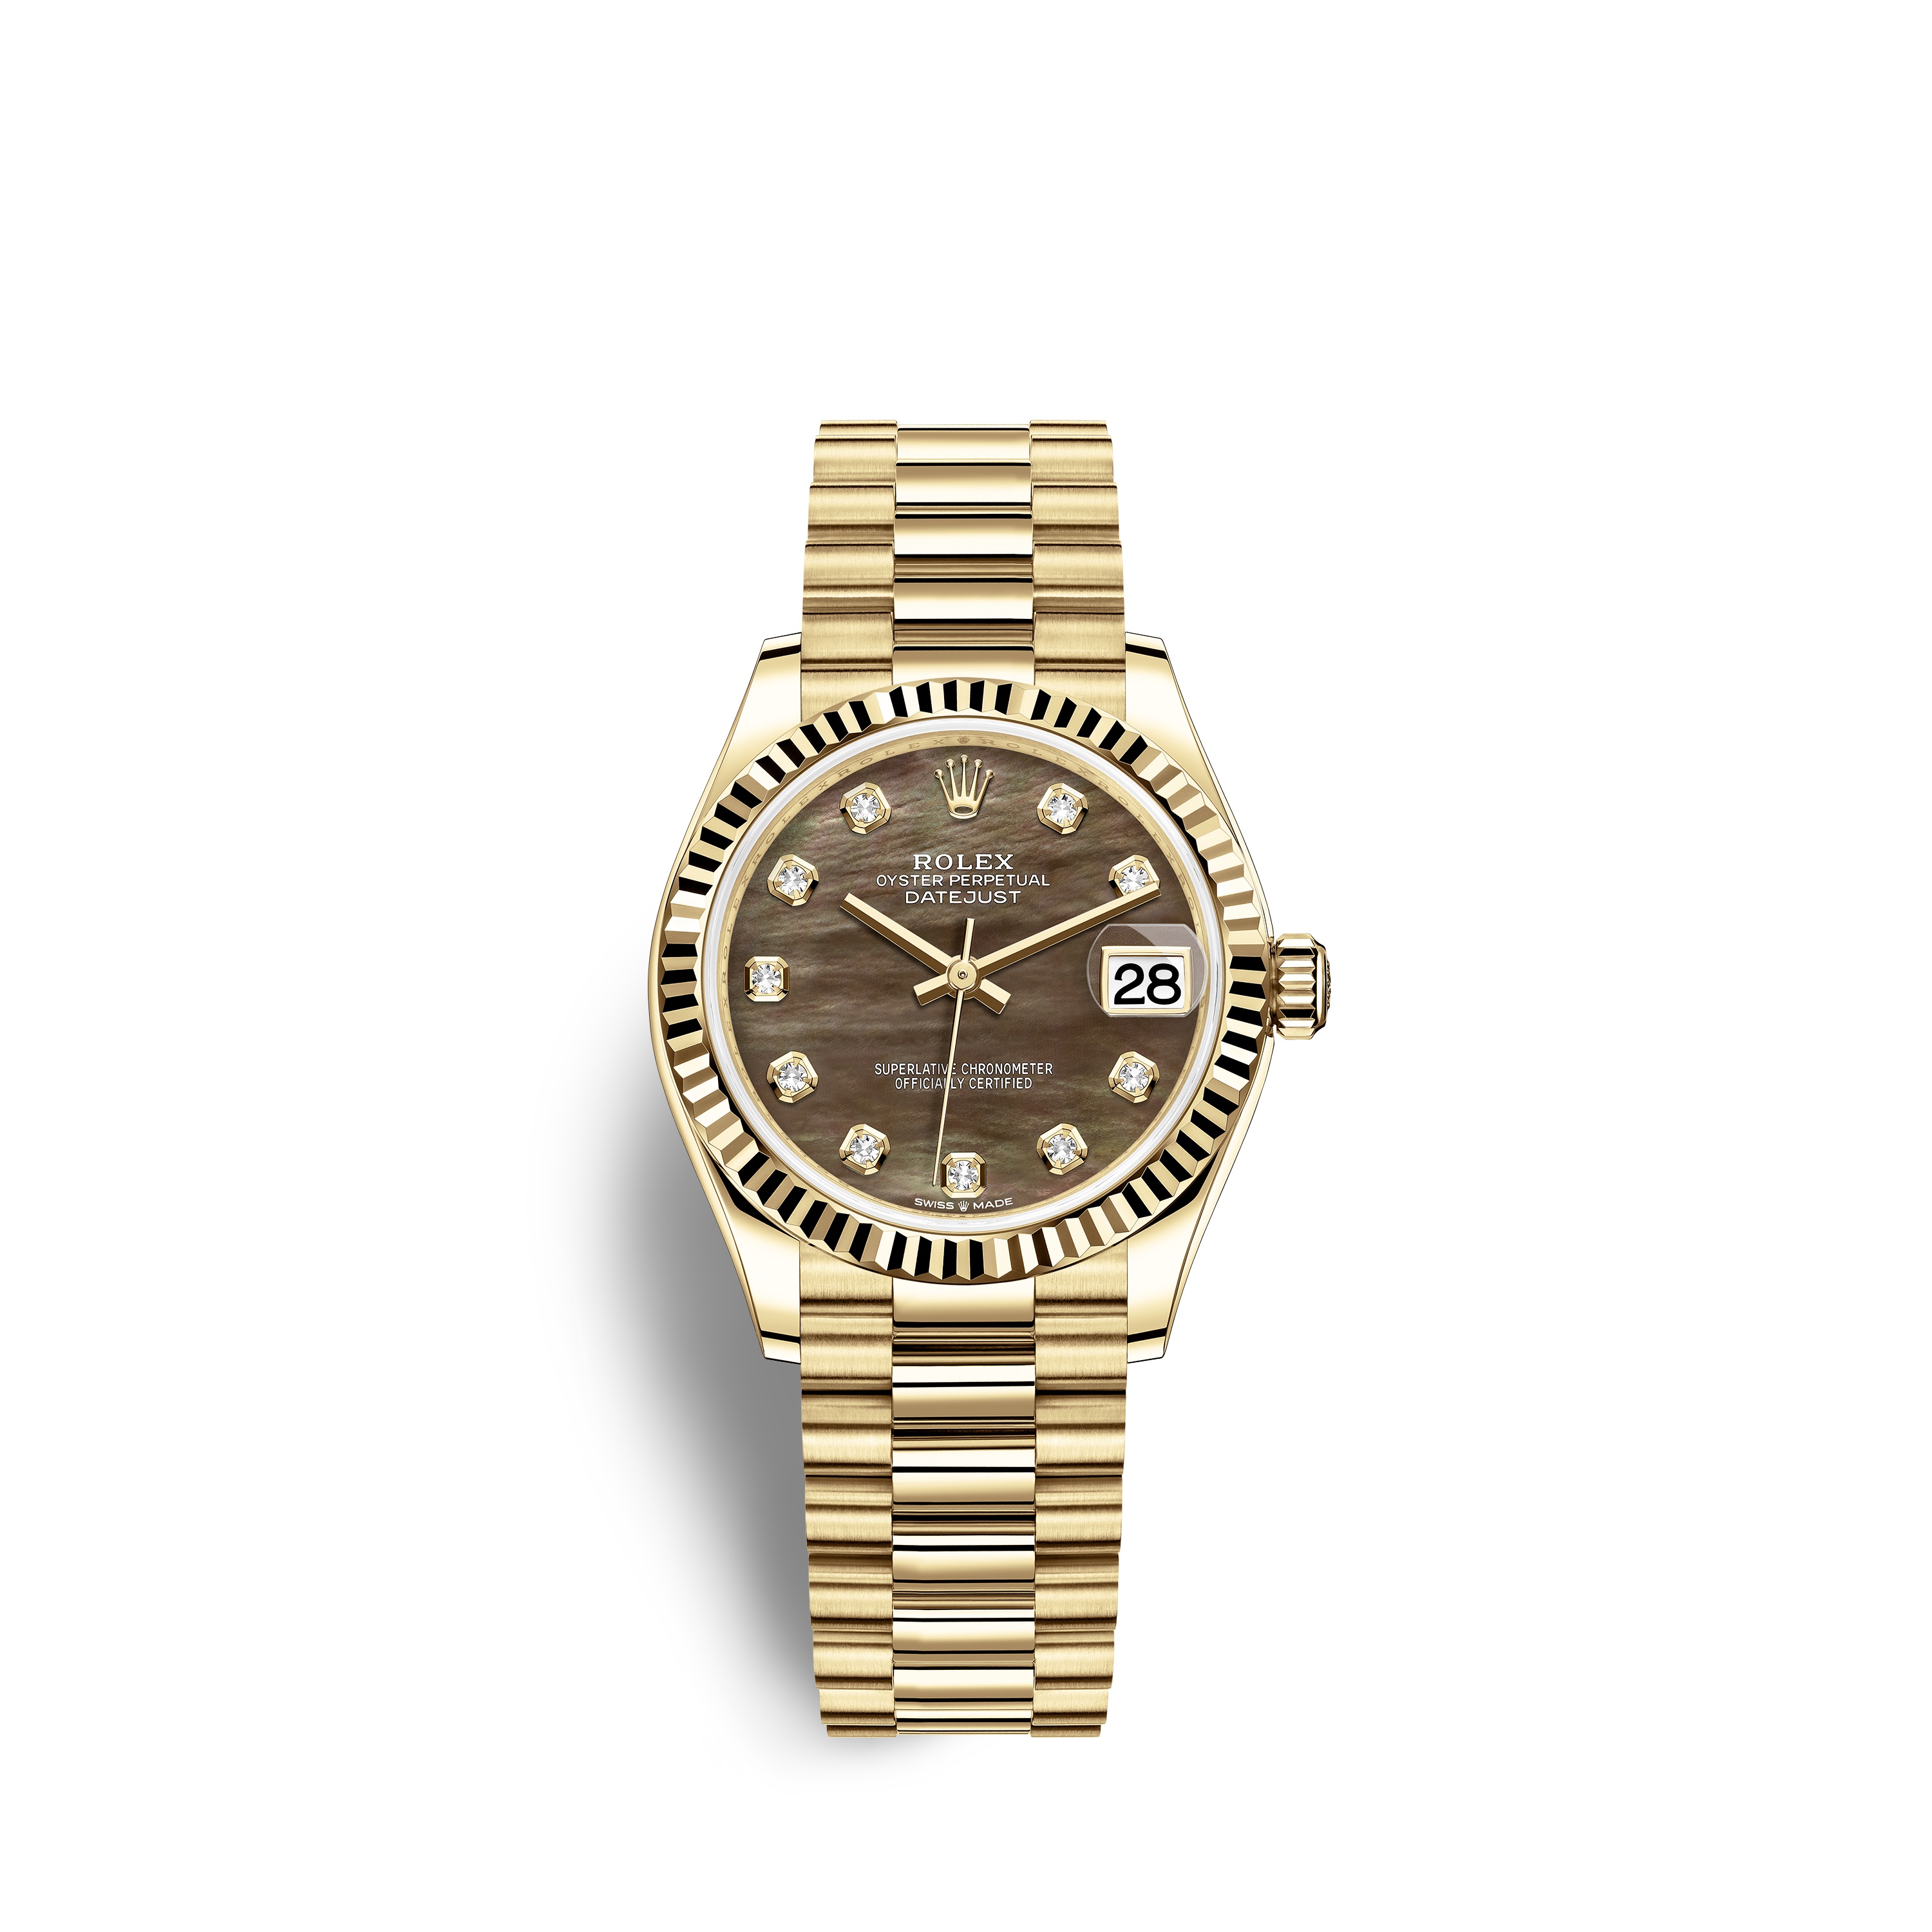 Datejust 31 278278 Gold Watch (Black Mother-of-Pearl Set with Diamonds)